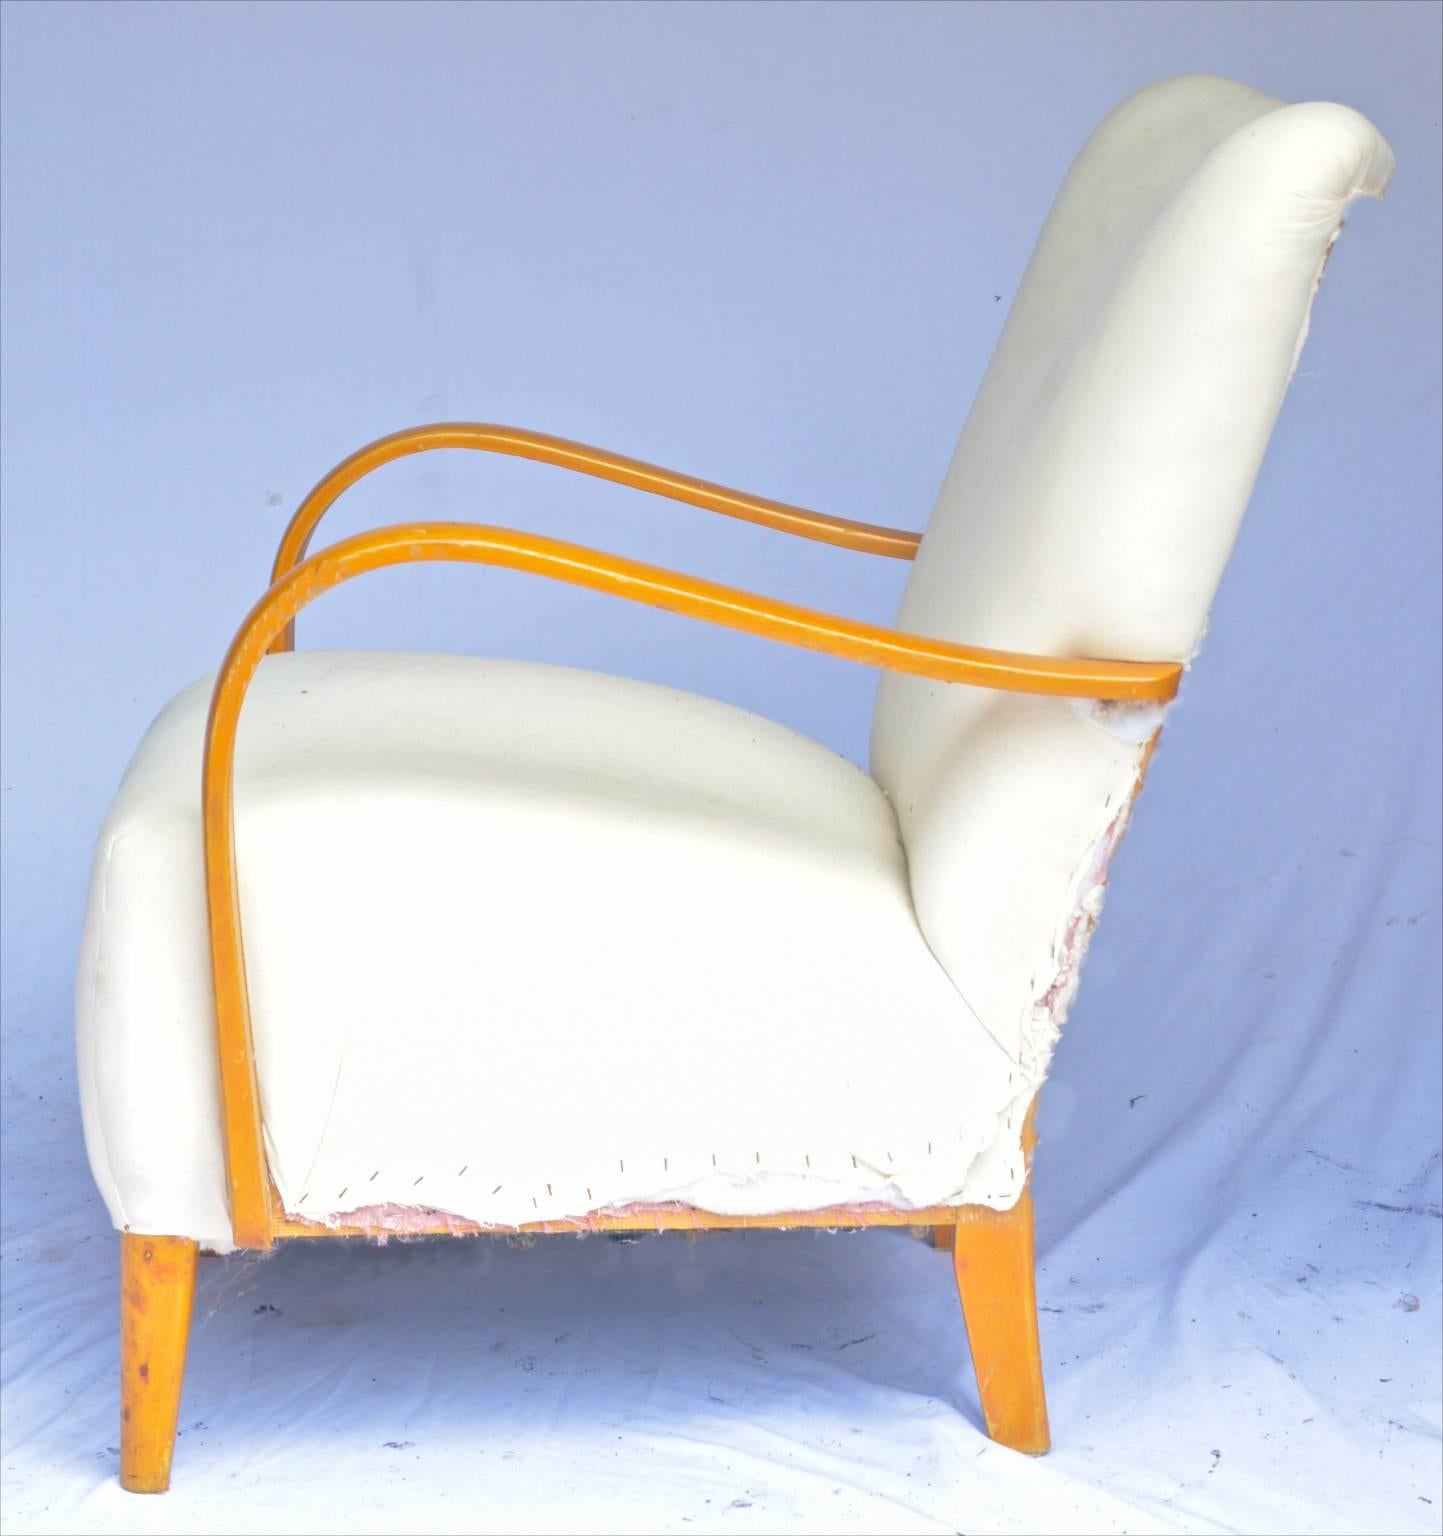 This is a Classic pair of original Swedish Art Deco armchairs with golden birch bentwood arms in a rich honey color French polish finish and with unusual simple feet. They are crossover pieces from later Art Deco into Swedish Modern and are a